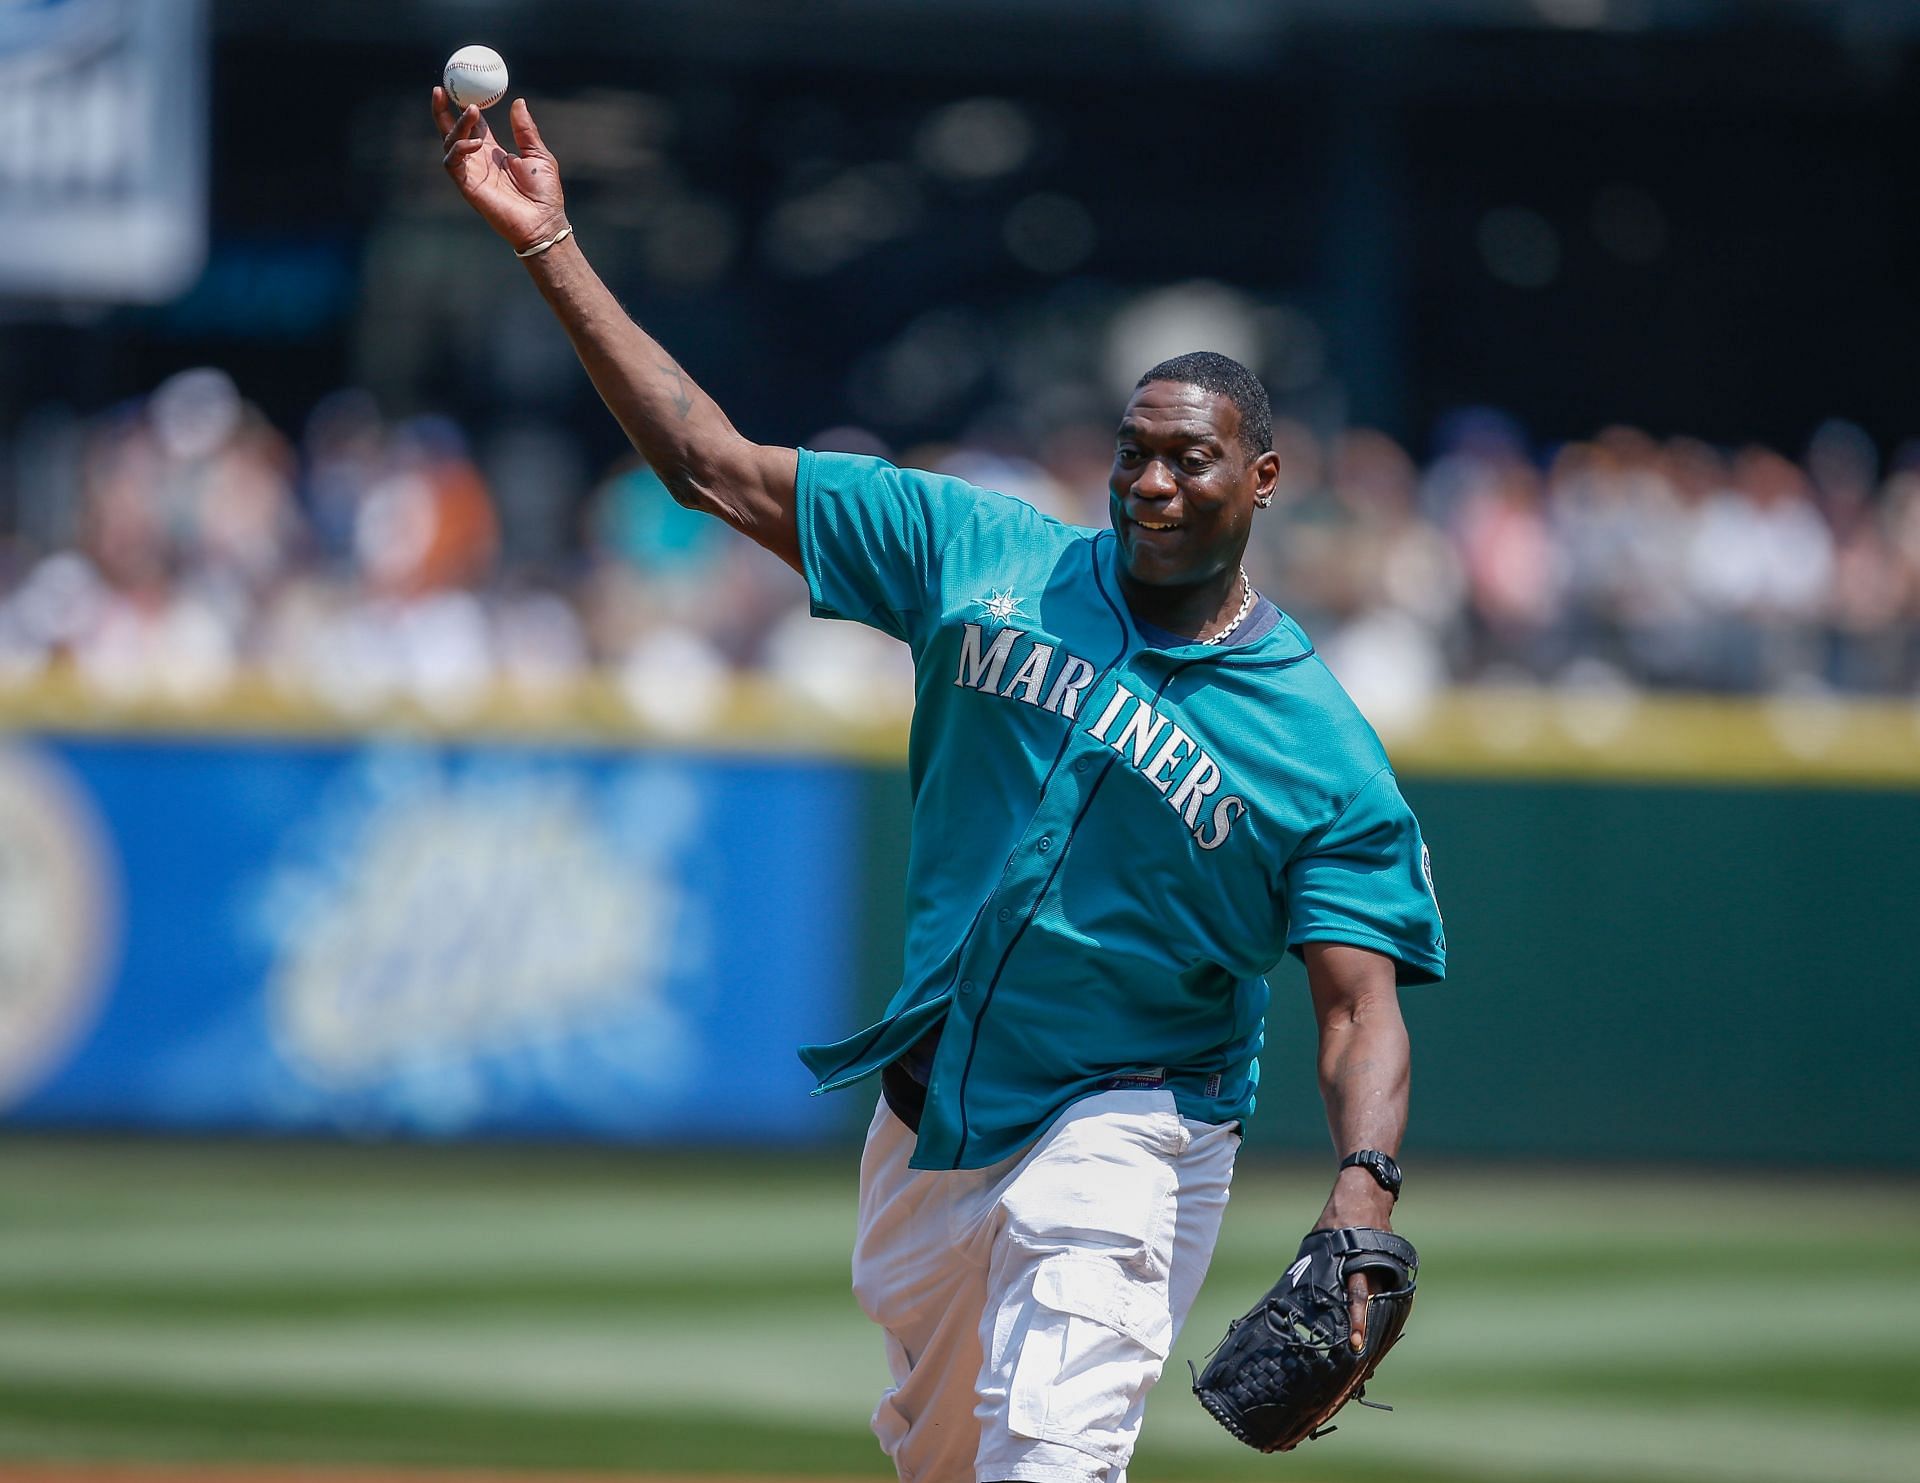 Shawn Kemp throwing the first pitch at the Detroit Tigers v Seattle Mariners game